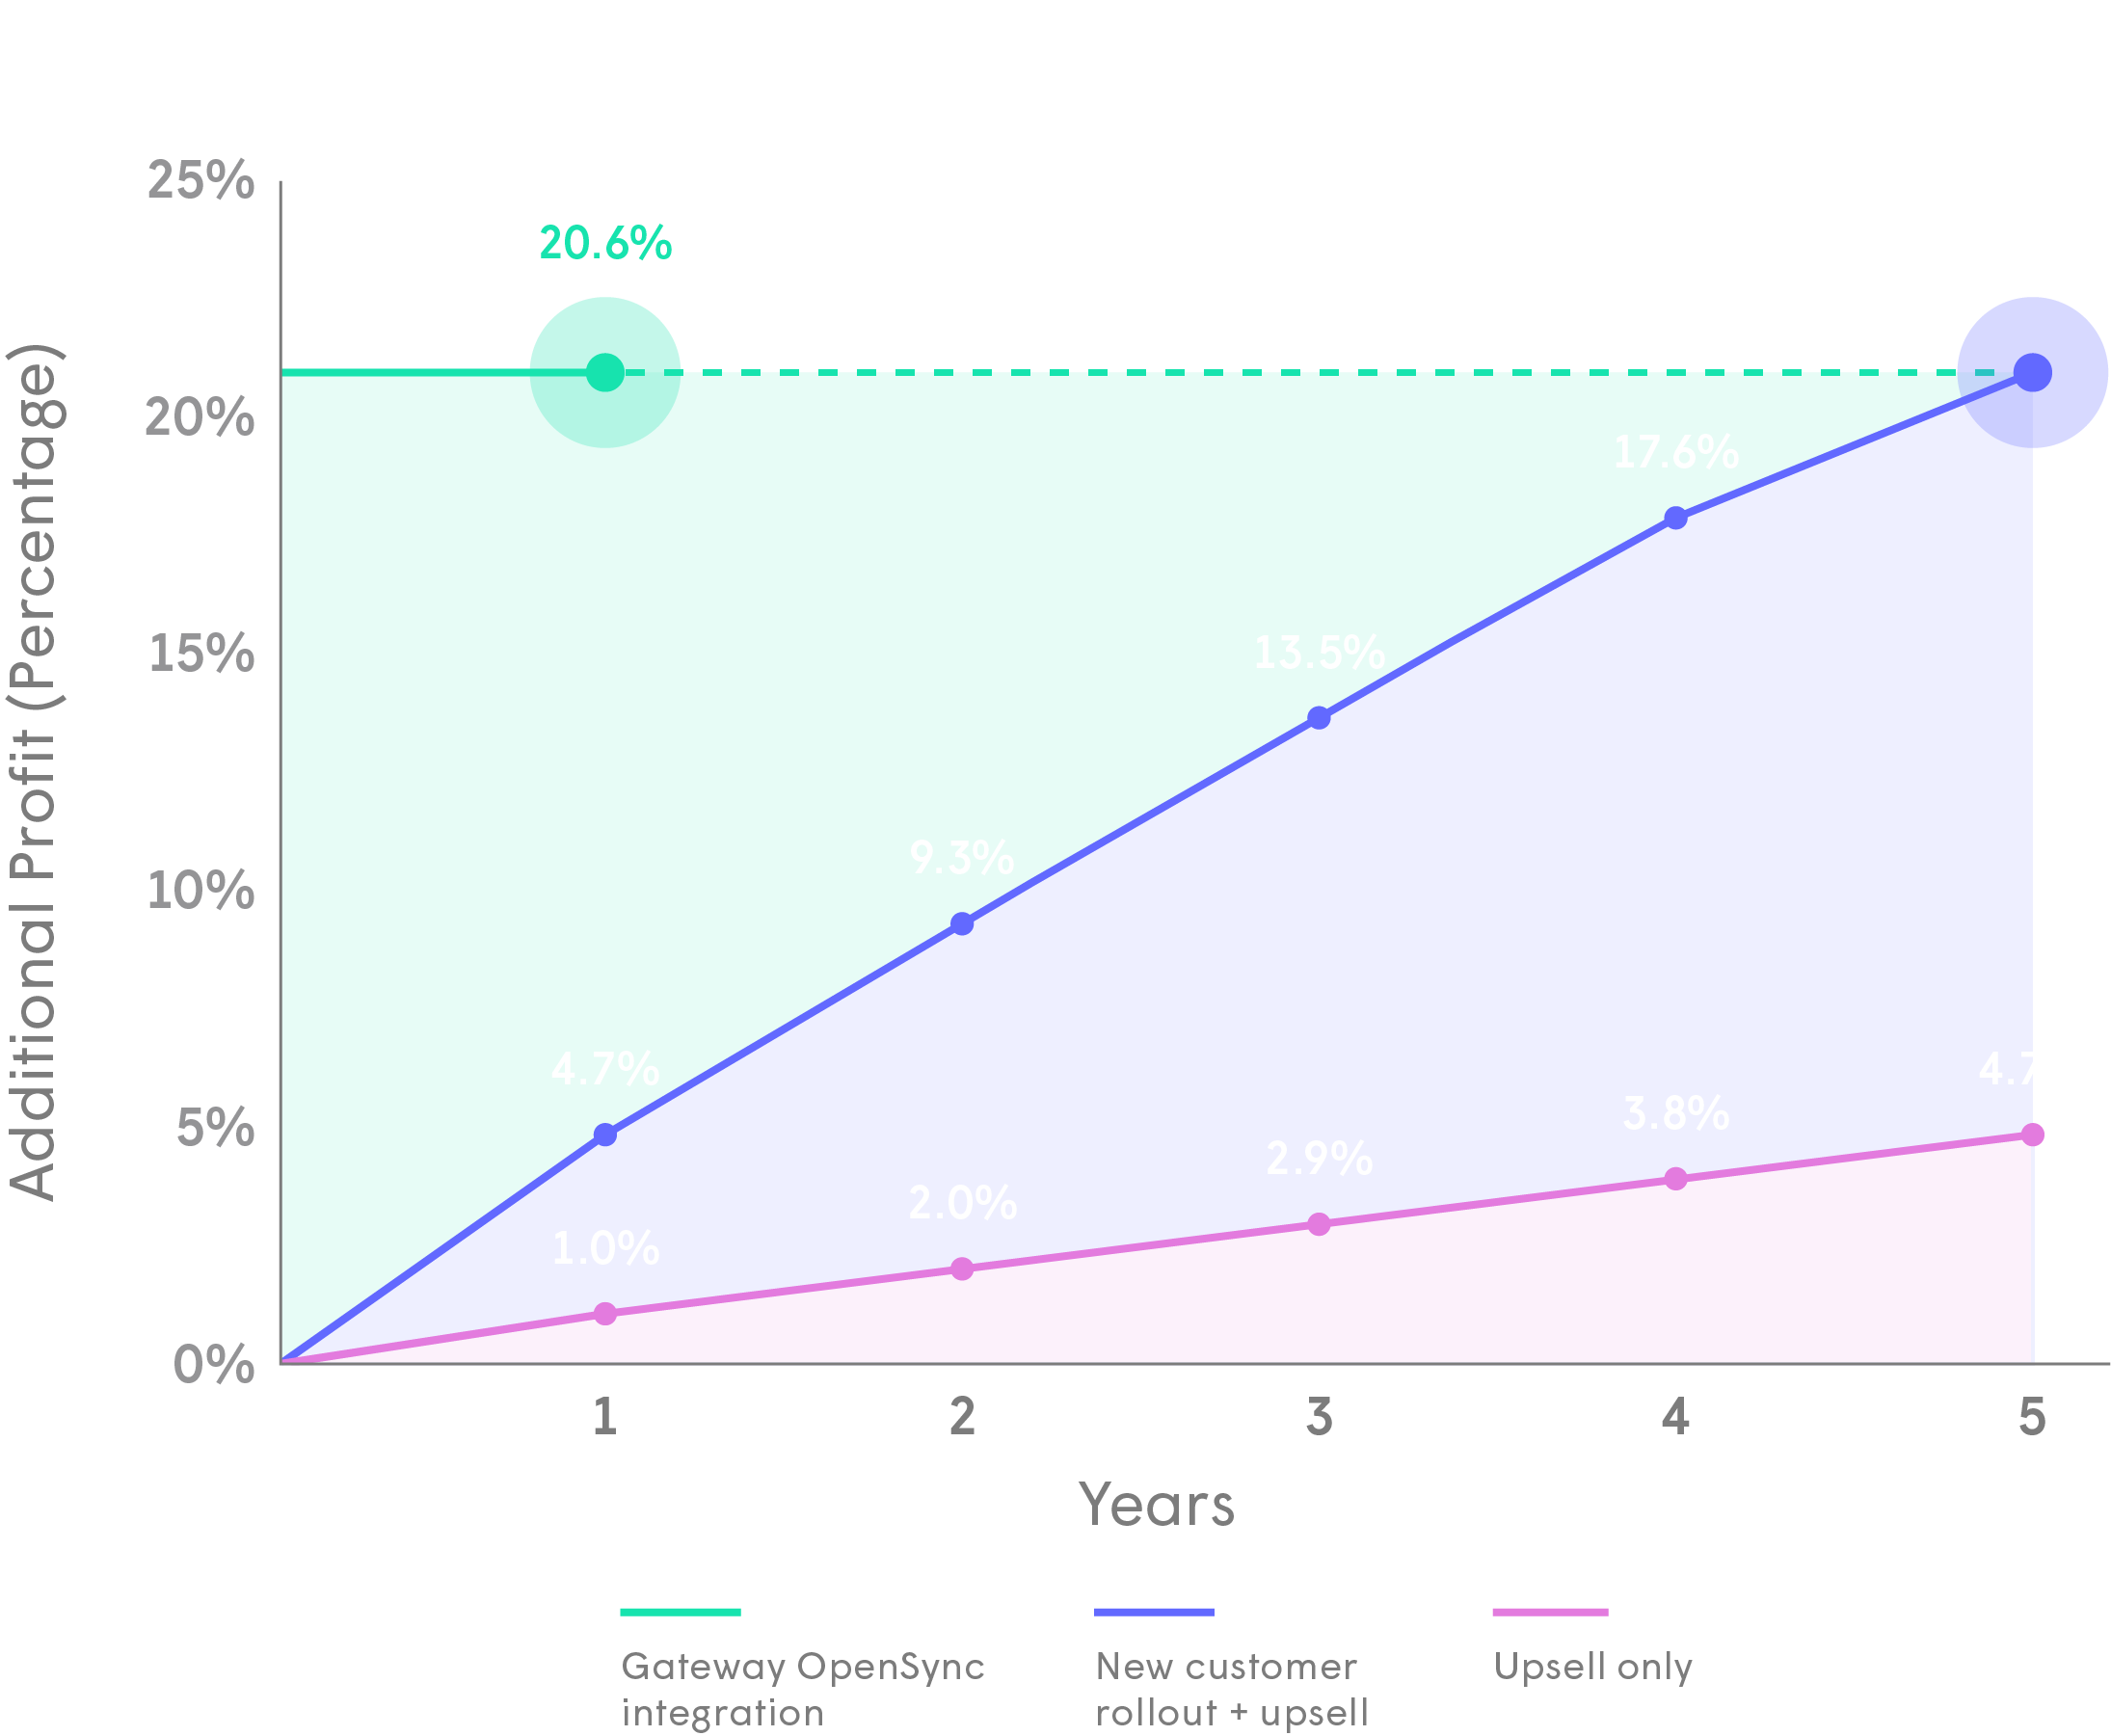 graph showing the average profit increase with CEM deployment